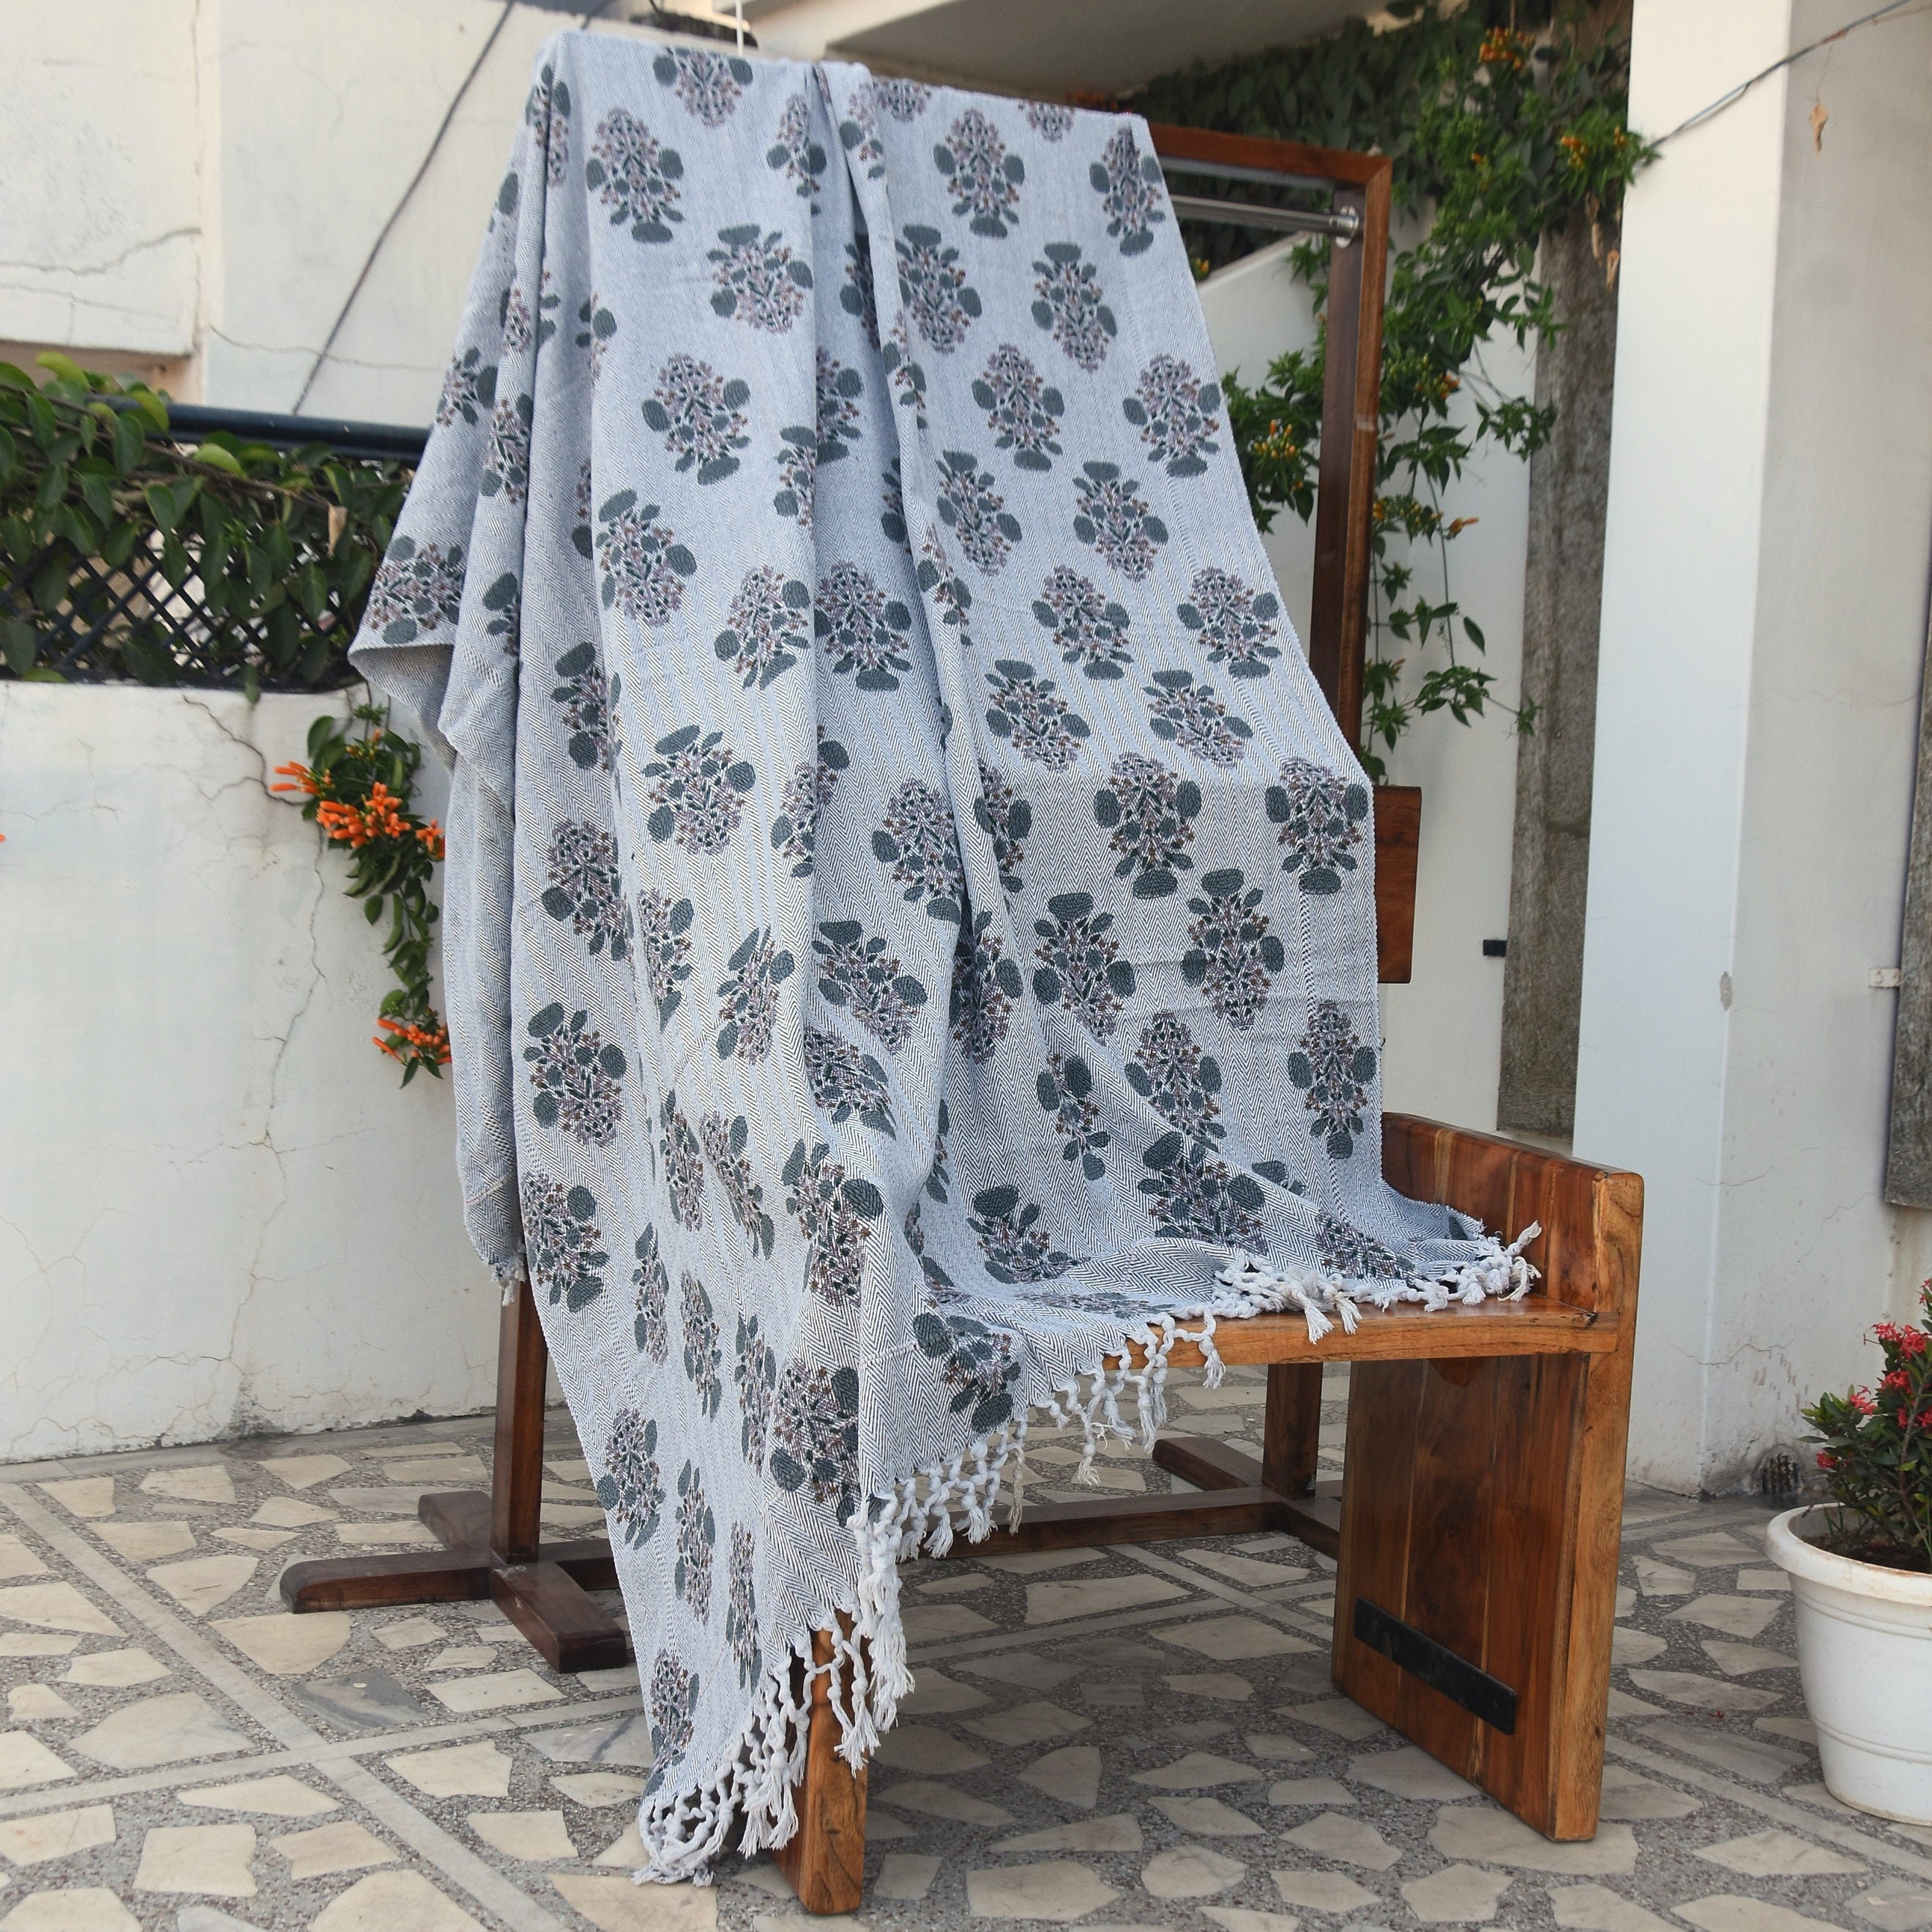 Handwoven Block Print Throws - Blankets and Throws - Handmade Blankets - Handwoven Handloom Fabric - KERI JAAL